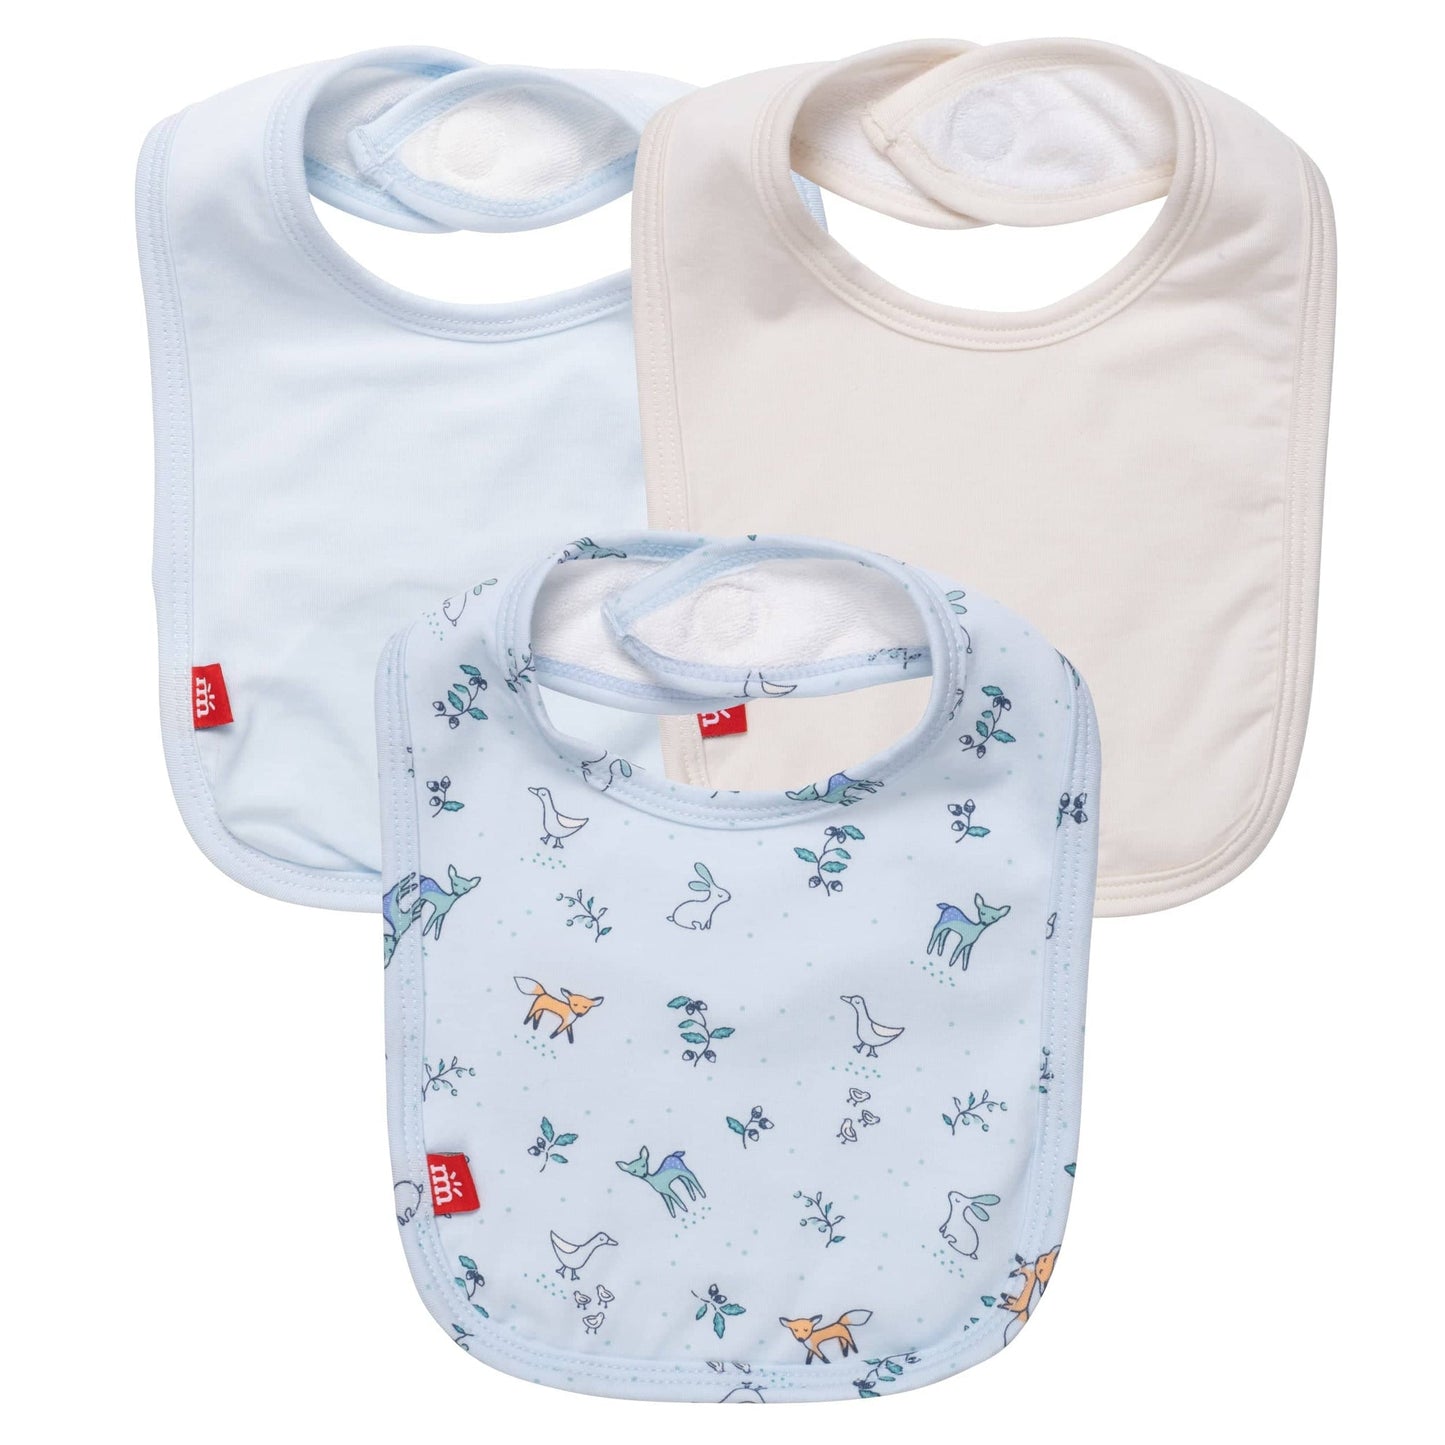 Magnetic Me “Woodsy Tale” Stay Dry Bibs Set of 3